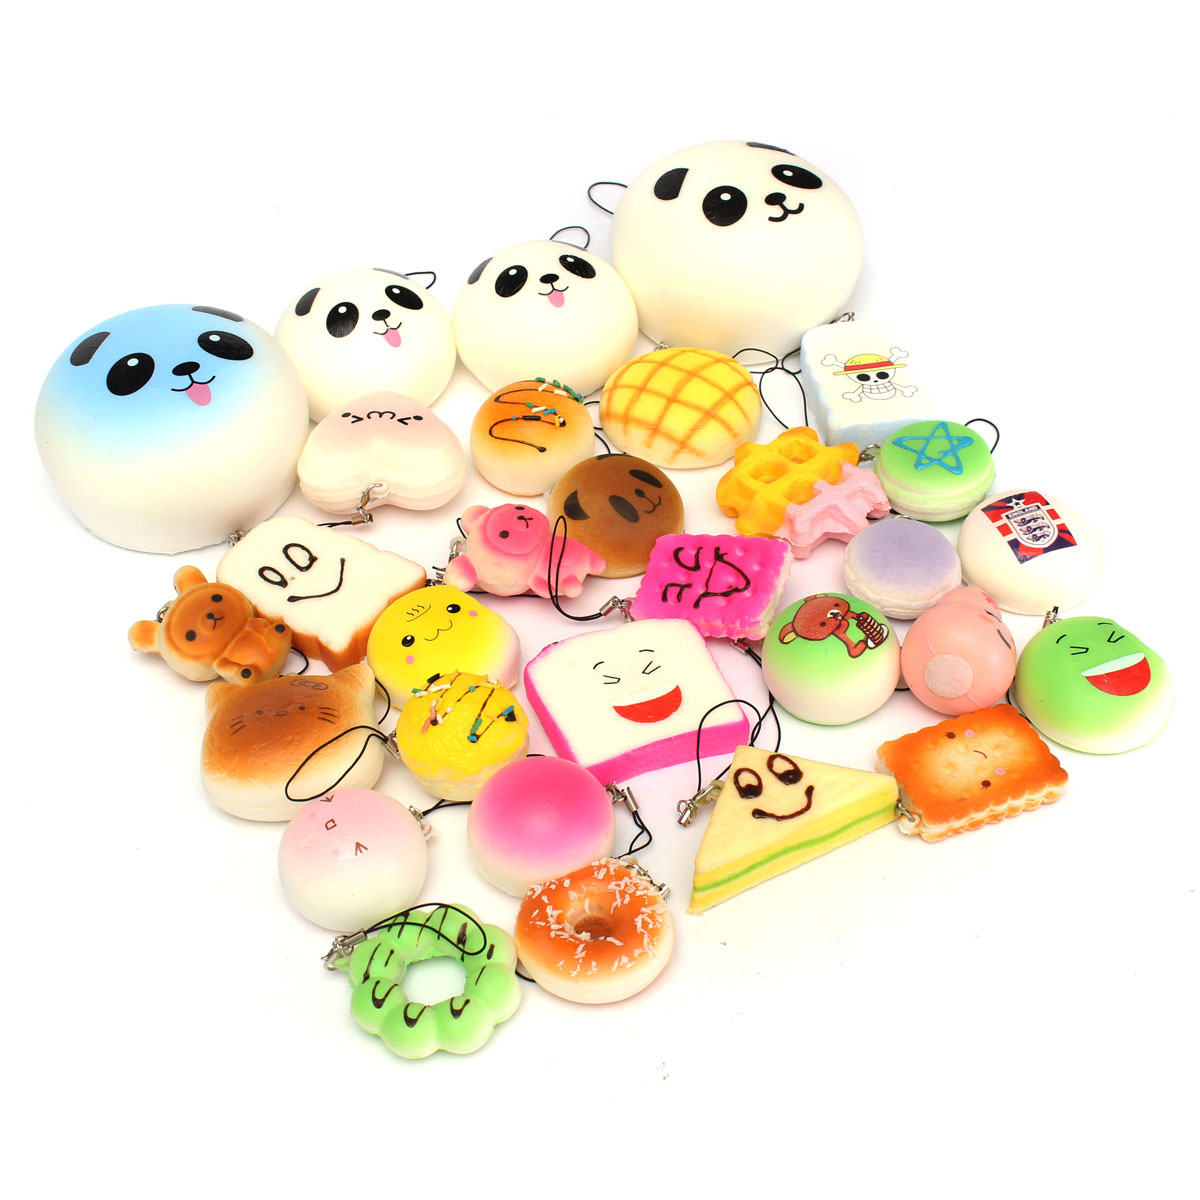 18PCS-Squishy-Christmas-Gift-Decor-Panda-Cup-Cake-Toasts-Buns-Donuts-Random-Soft-Cell-Phone-Straps-1069615-1